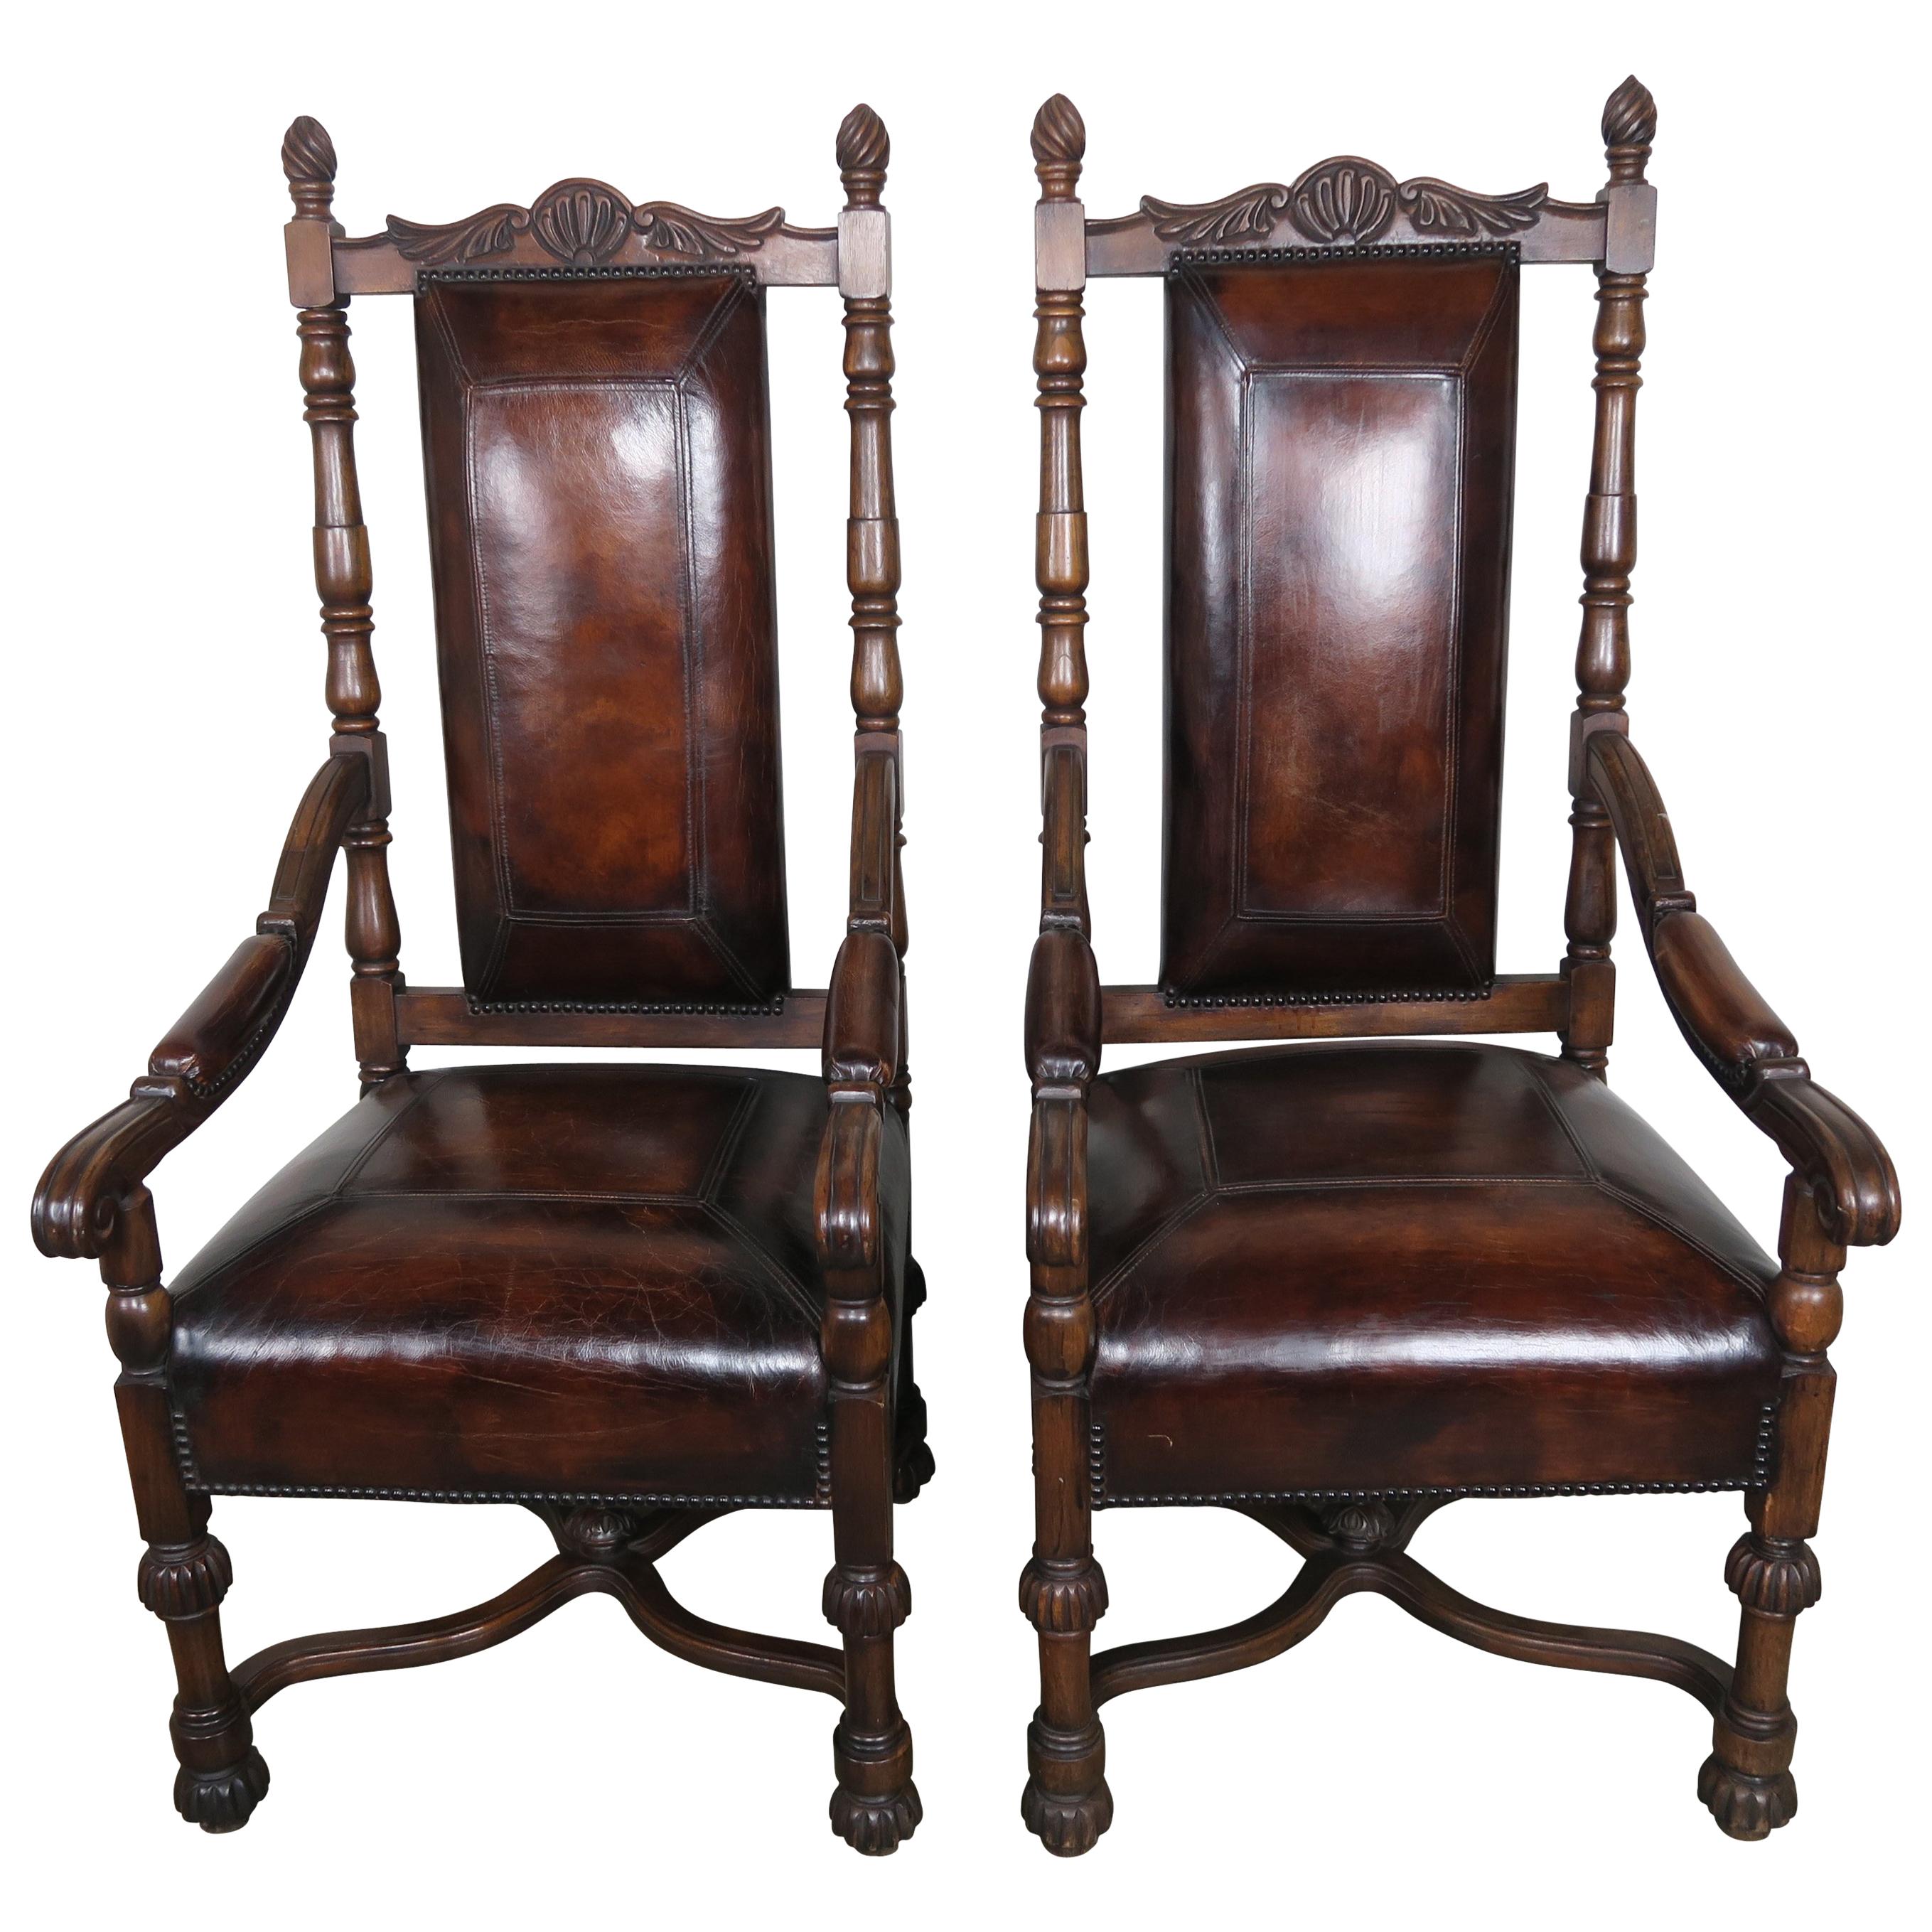 Pair of English Mahogany Armchairs w/ Leather Upholstery